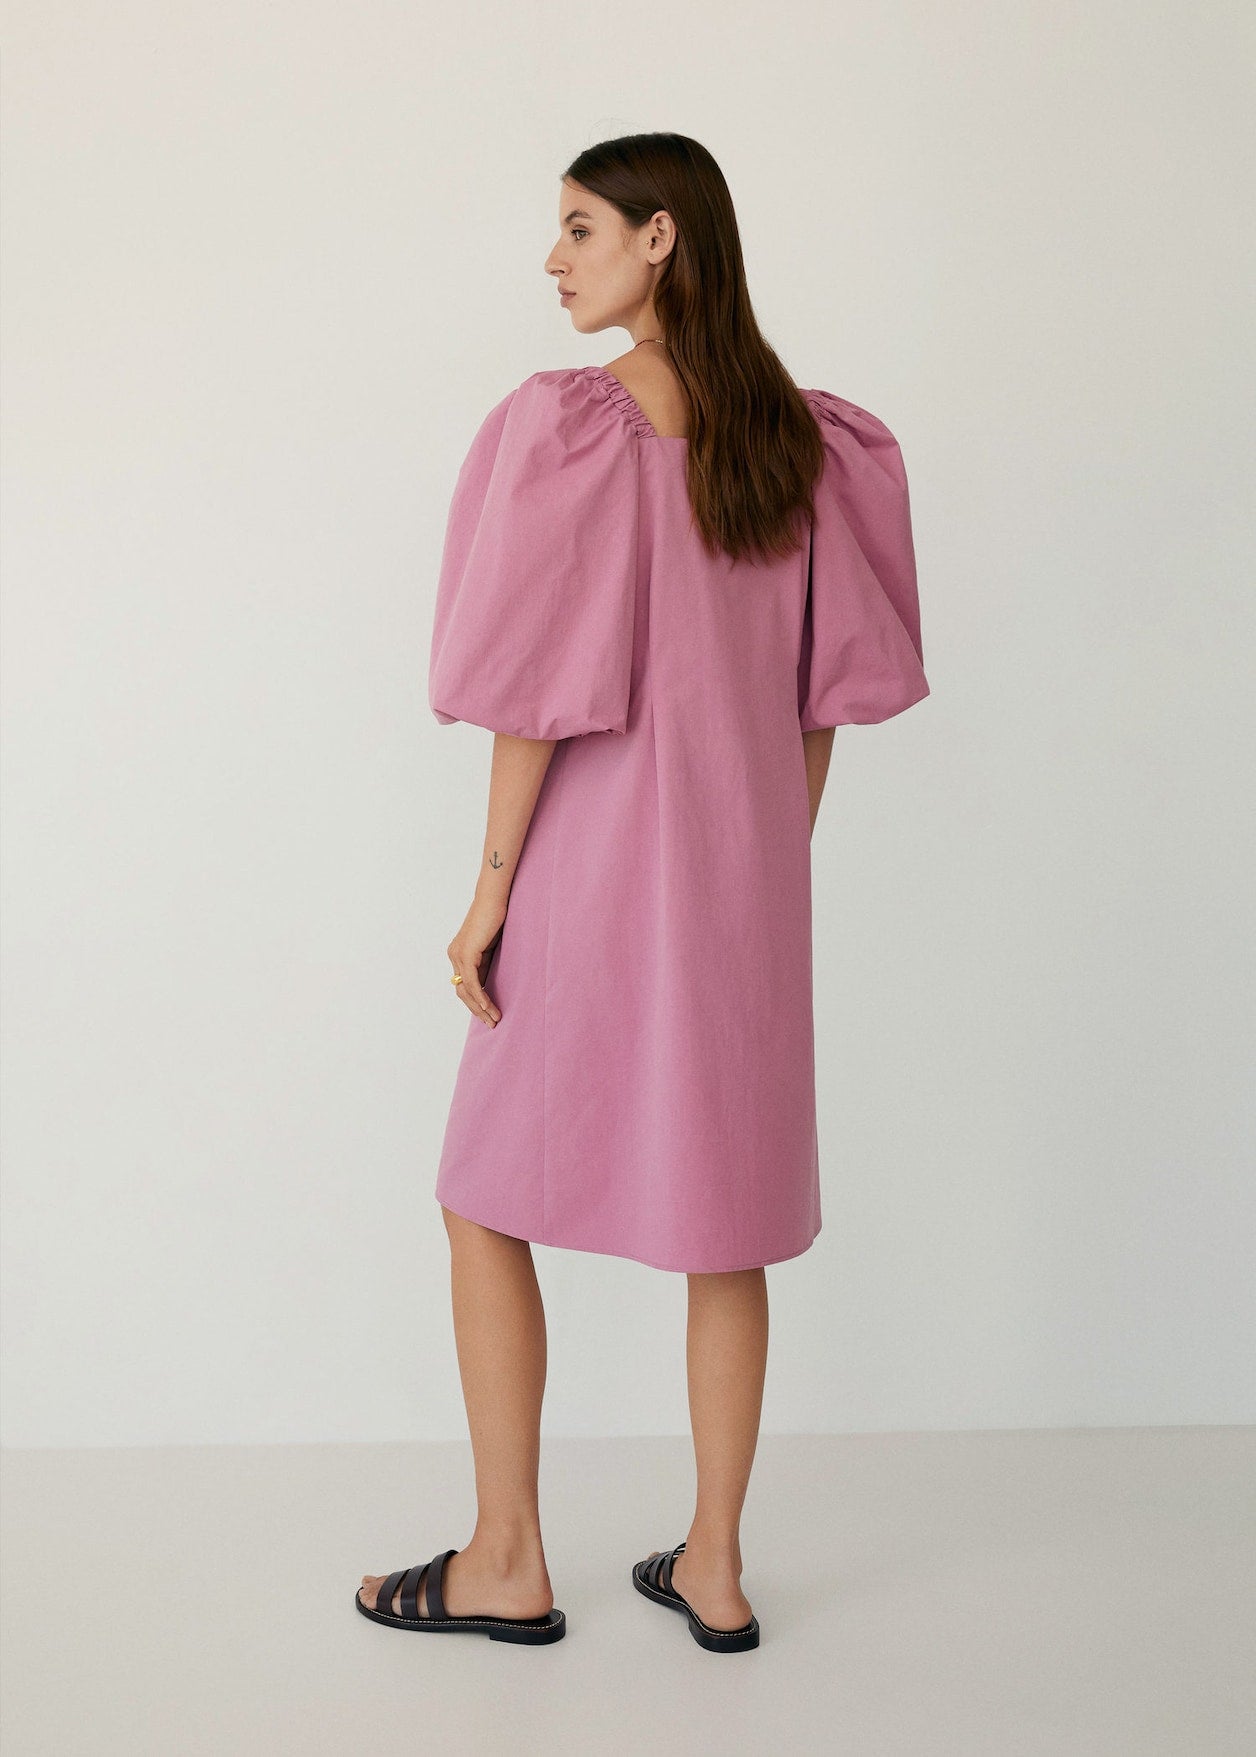 Poplin buttoned dress from Midi Dresses collection you can buy now from Fashion And Icon online shop